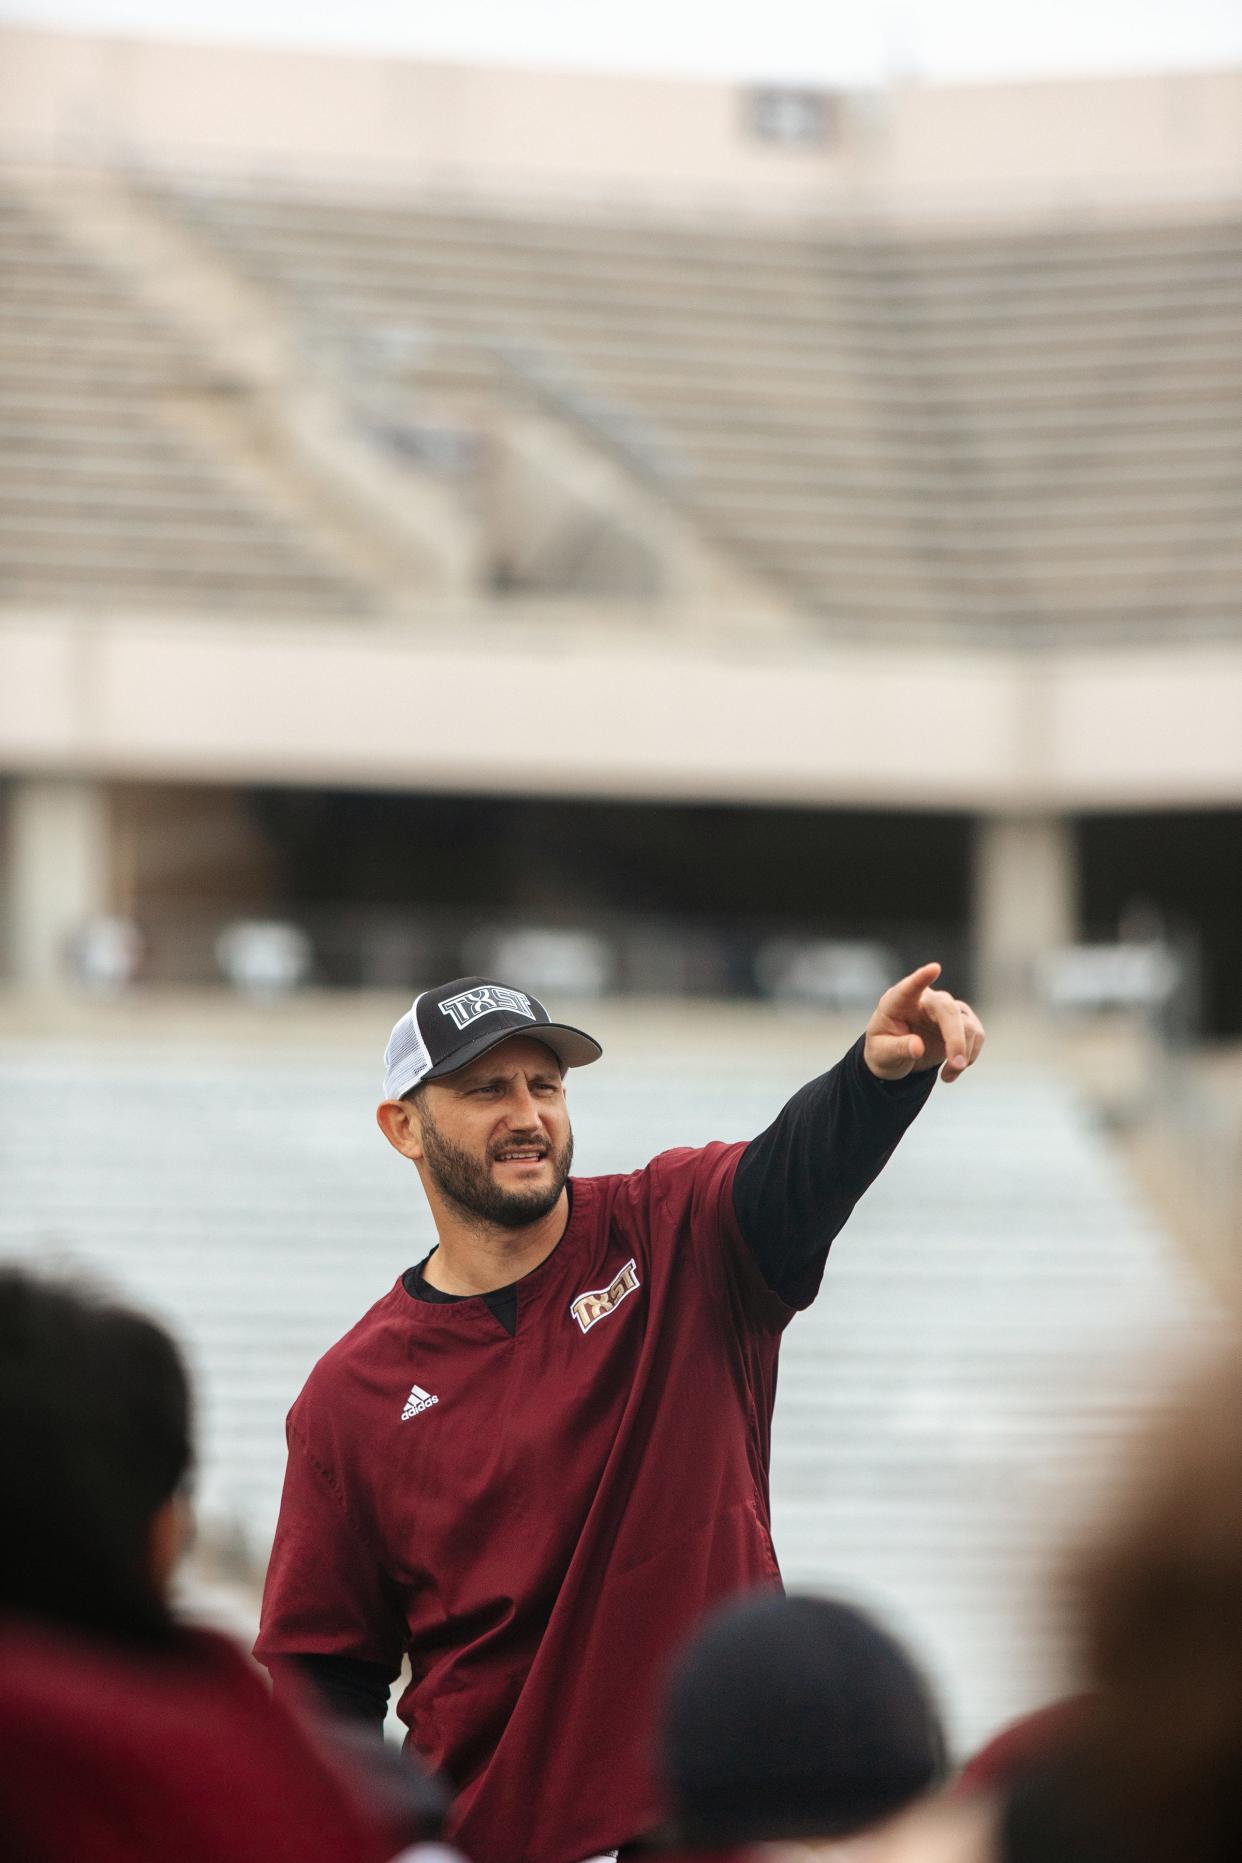 Things are looking up at Texas State. The Bobcats, largely rebuilt this year with a slew of transfers for new coach G.J. Kinne, won their sixth game of the season last Saturday to become bowl eligible. The Sun Belt has five tie-ins with bowl games, including three (the Frisco Bowl, the First Responders Bowl and the Armed Services Bowl) inside the state.